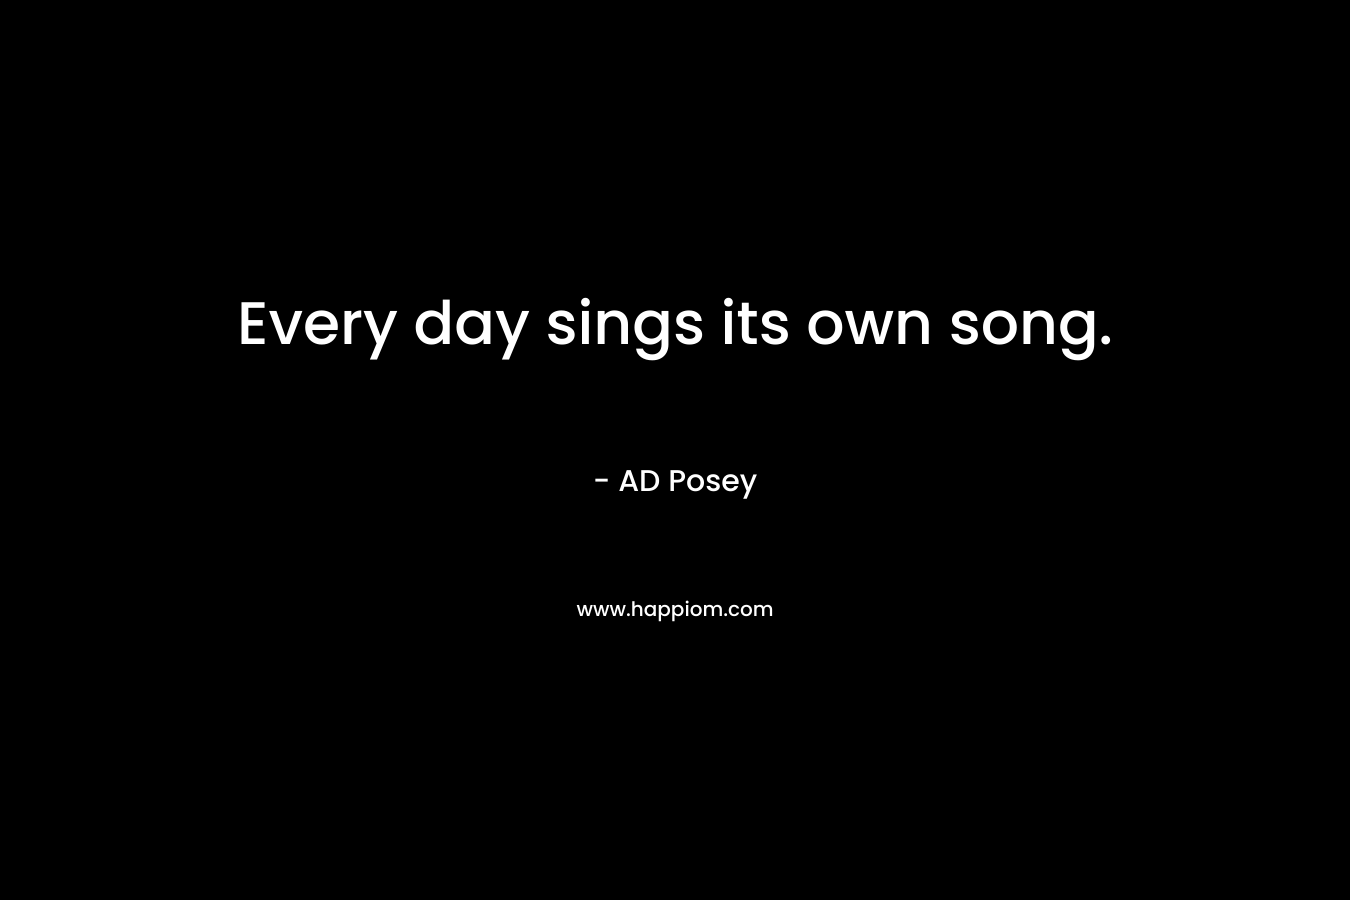 Every day sings its own song.